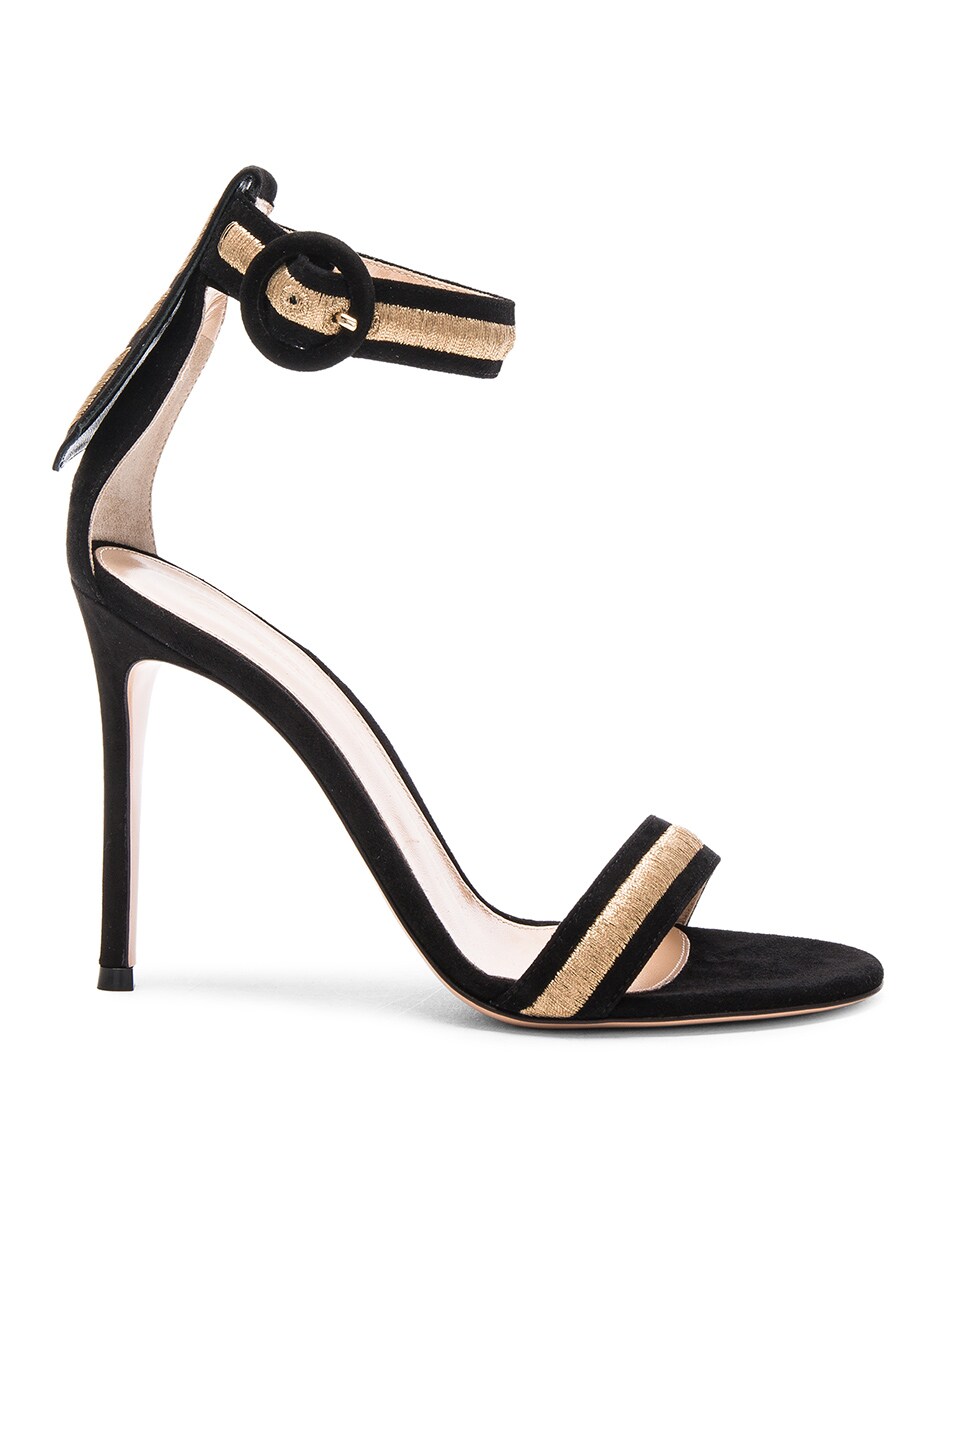 Image 1 of Gianvito Rossi Suede Ankle Strap Heels in Black & Gold